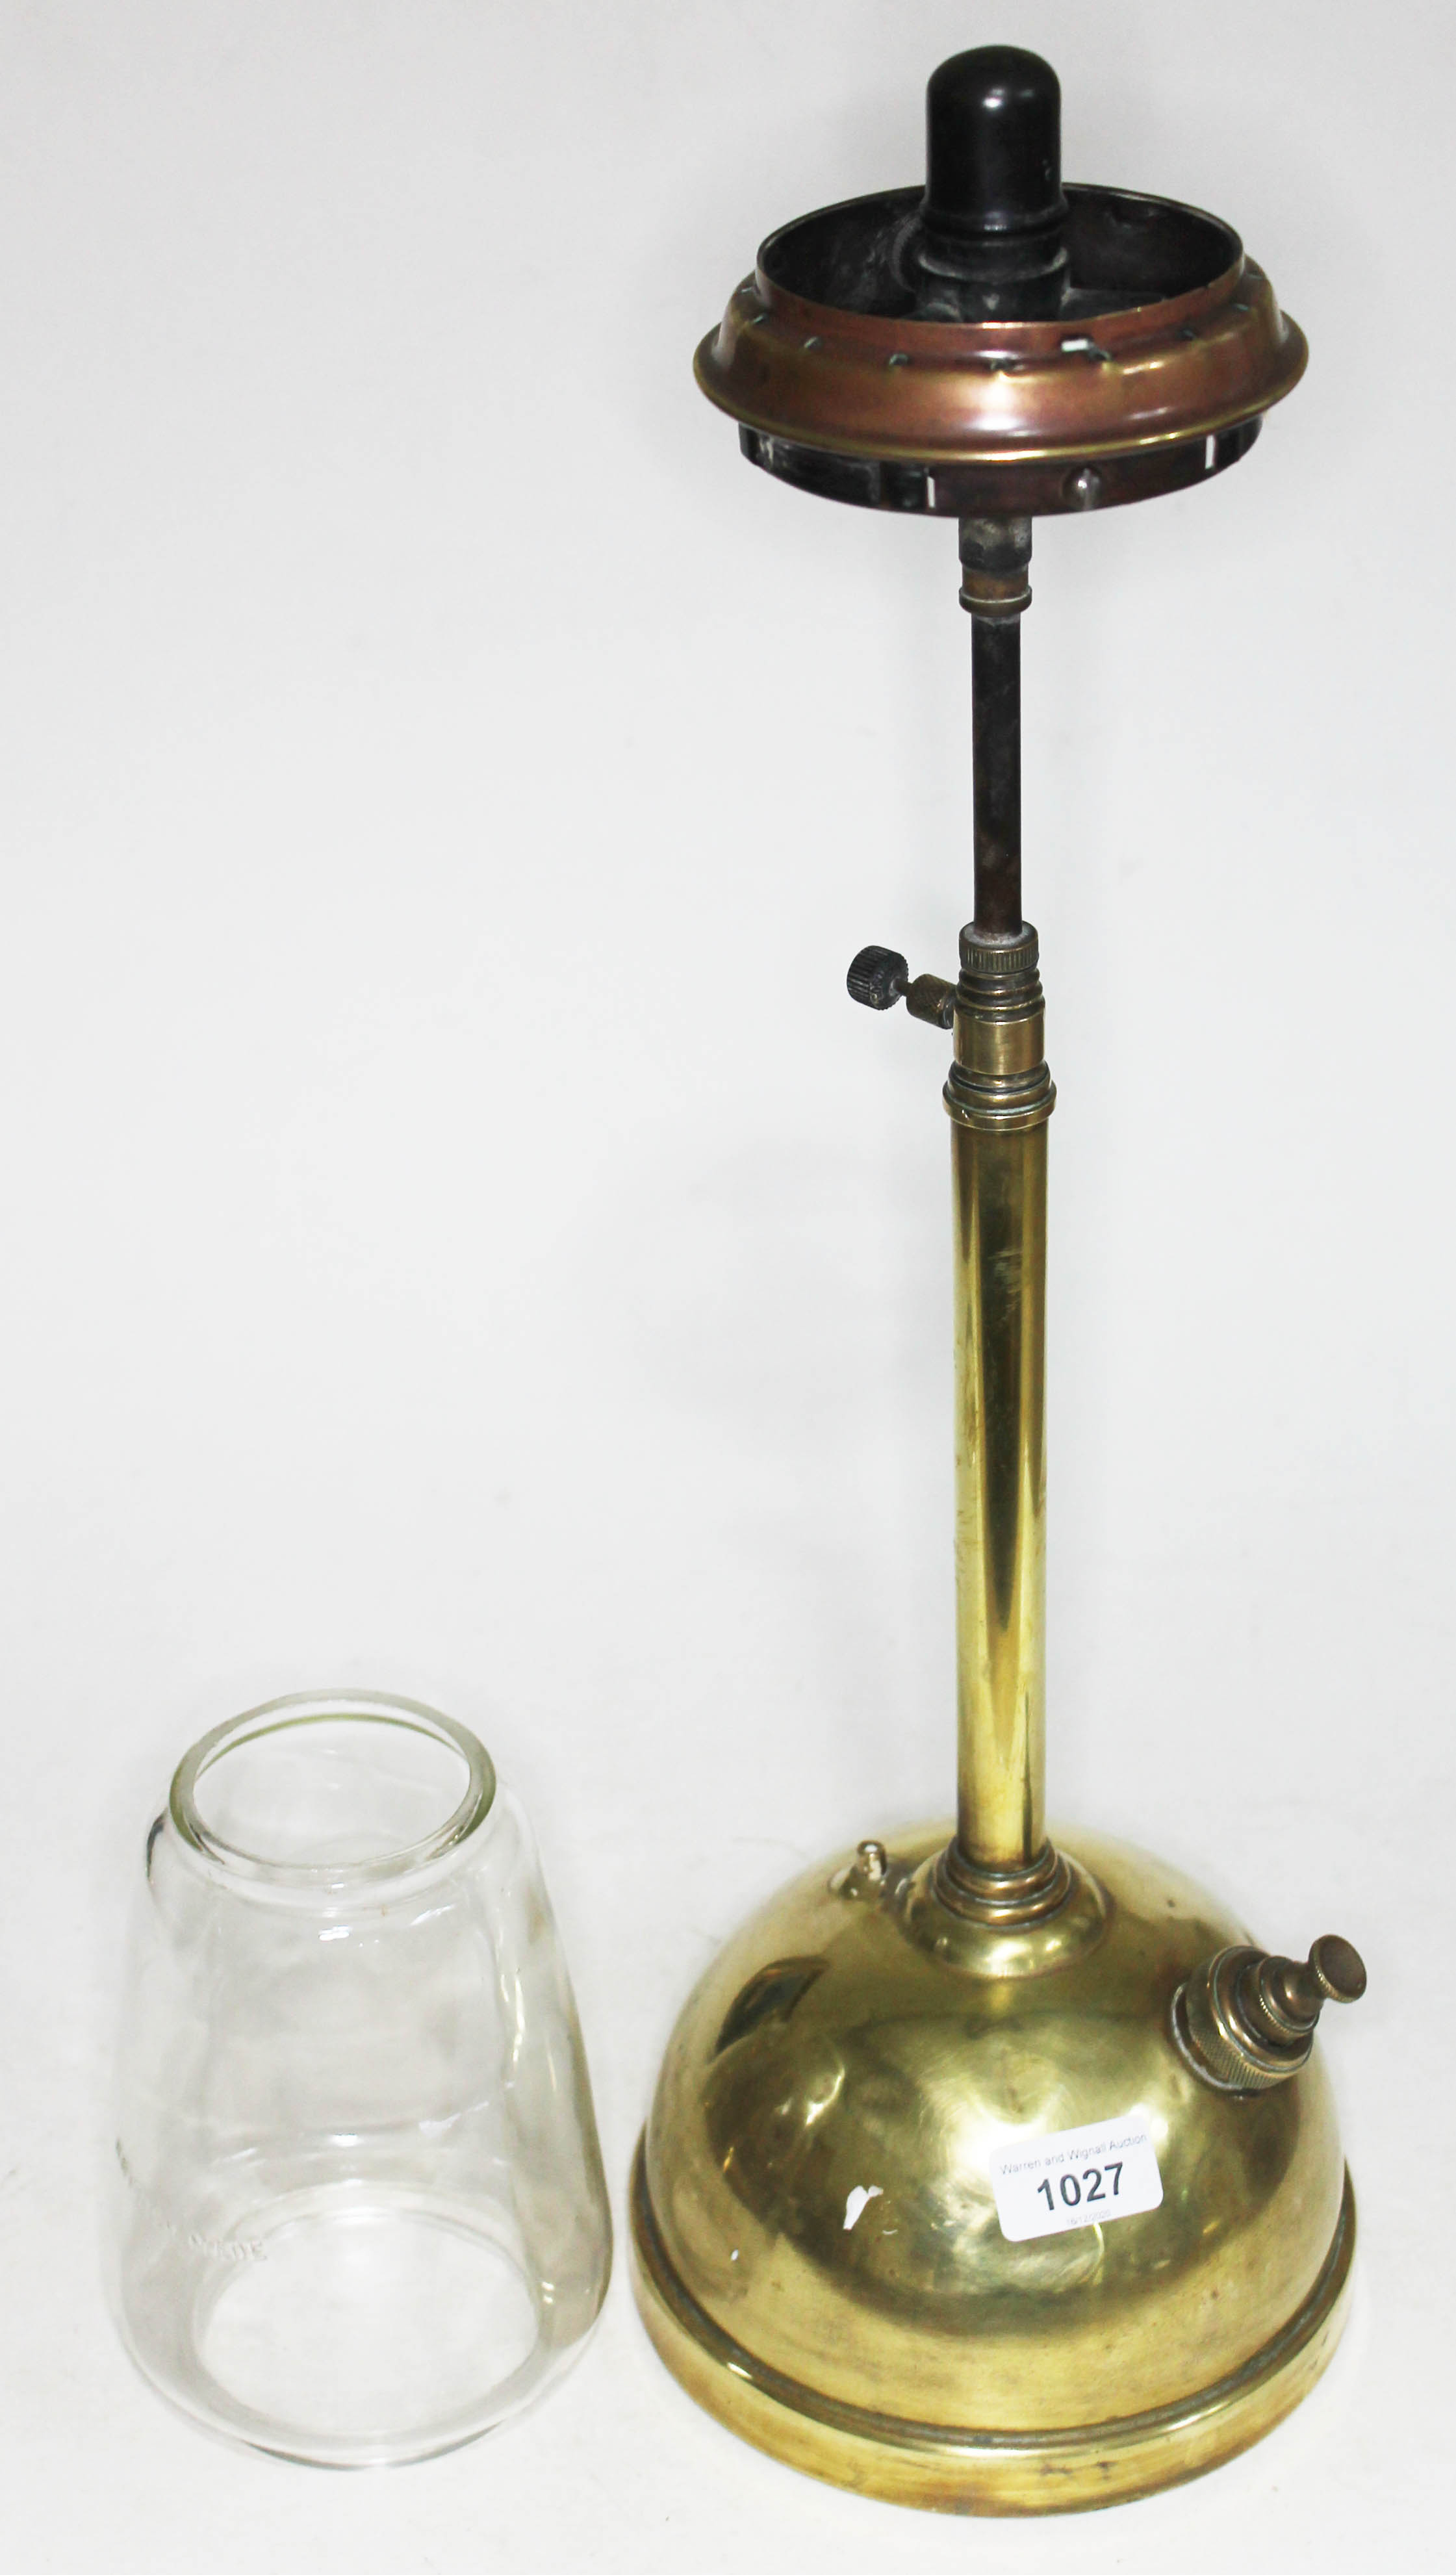 Antique brass oil or paraffin tilly lamp. PAT No 202485